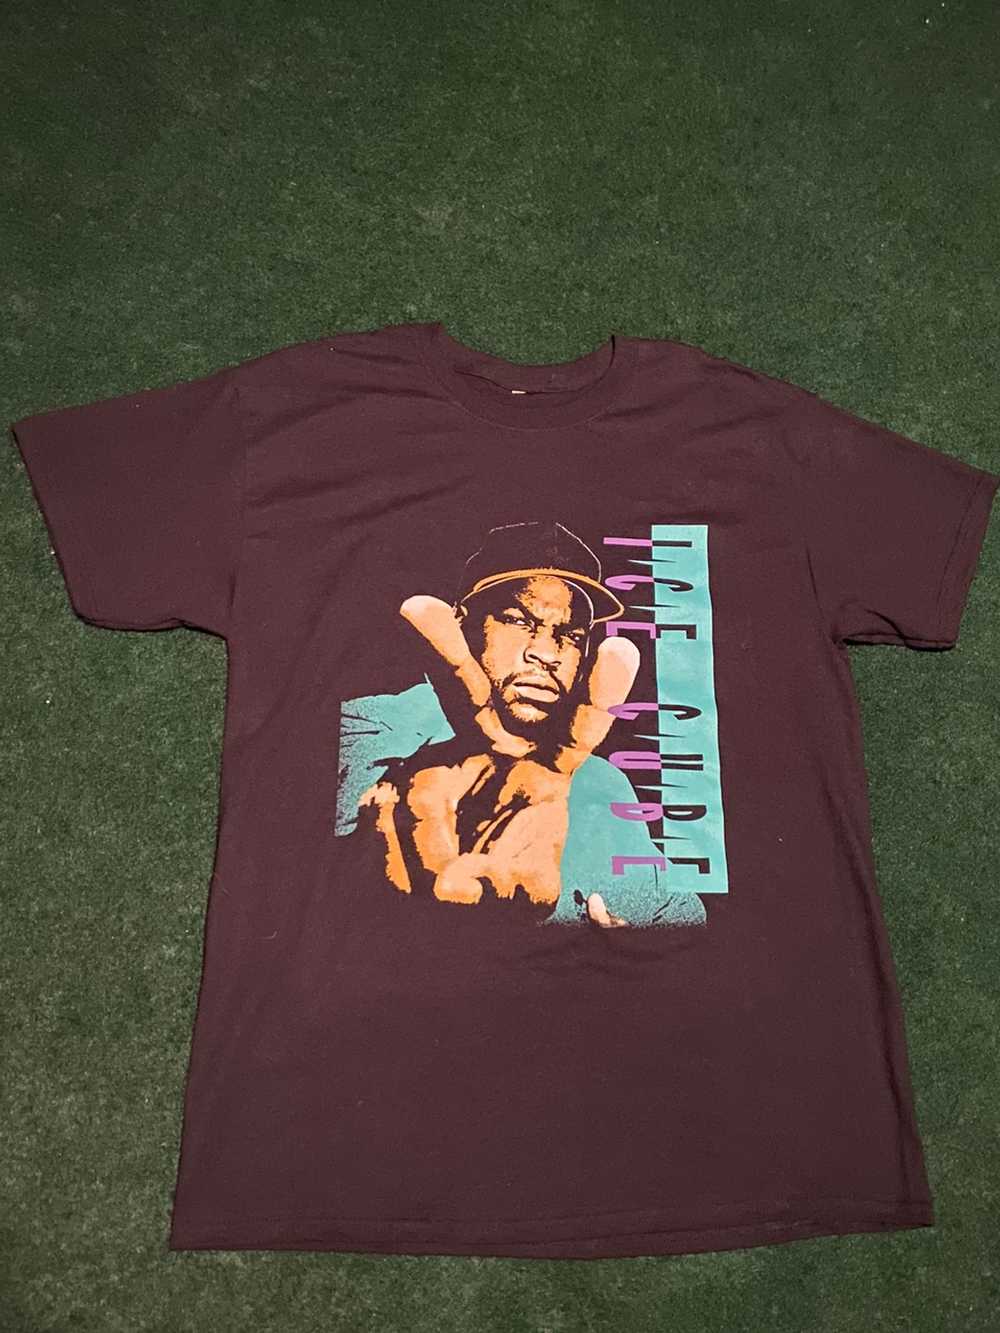 Ice Cube Today Was a Good Day Graphic Tee Black T-Shirt Sz M 90s RAP NWA  UNISEX